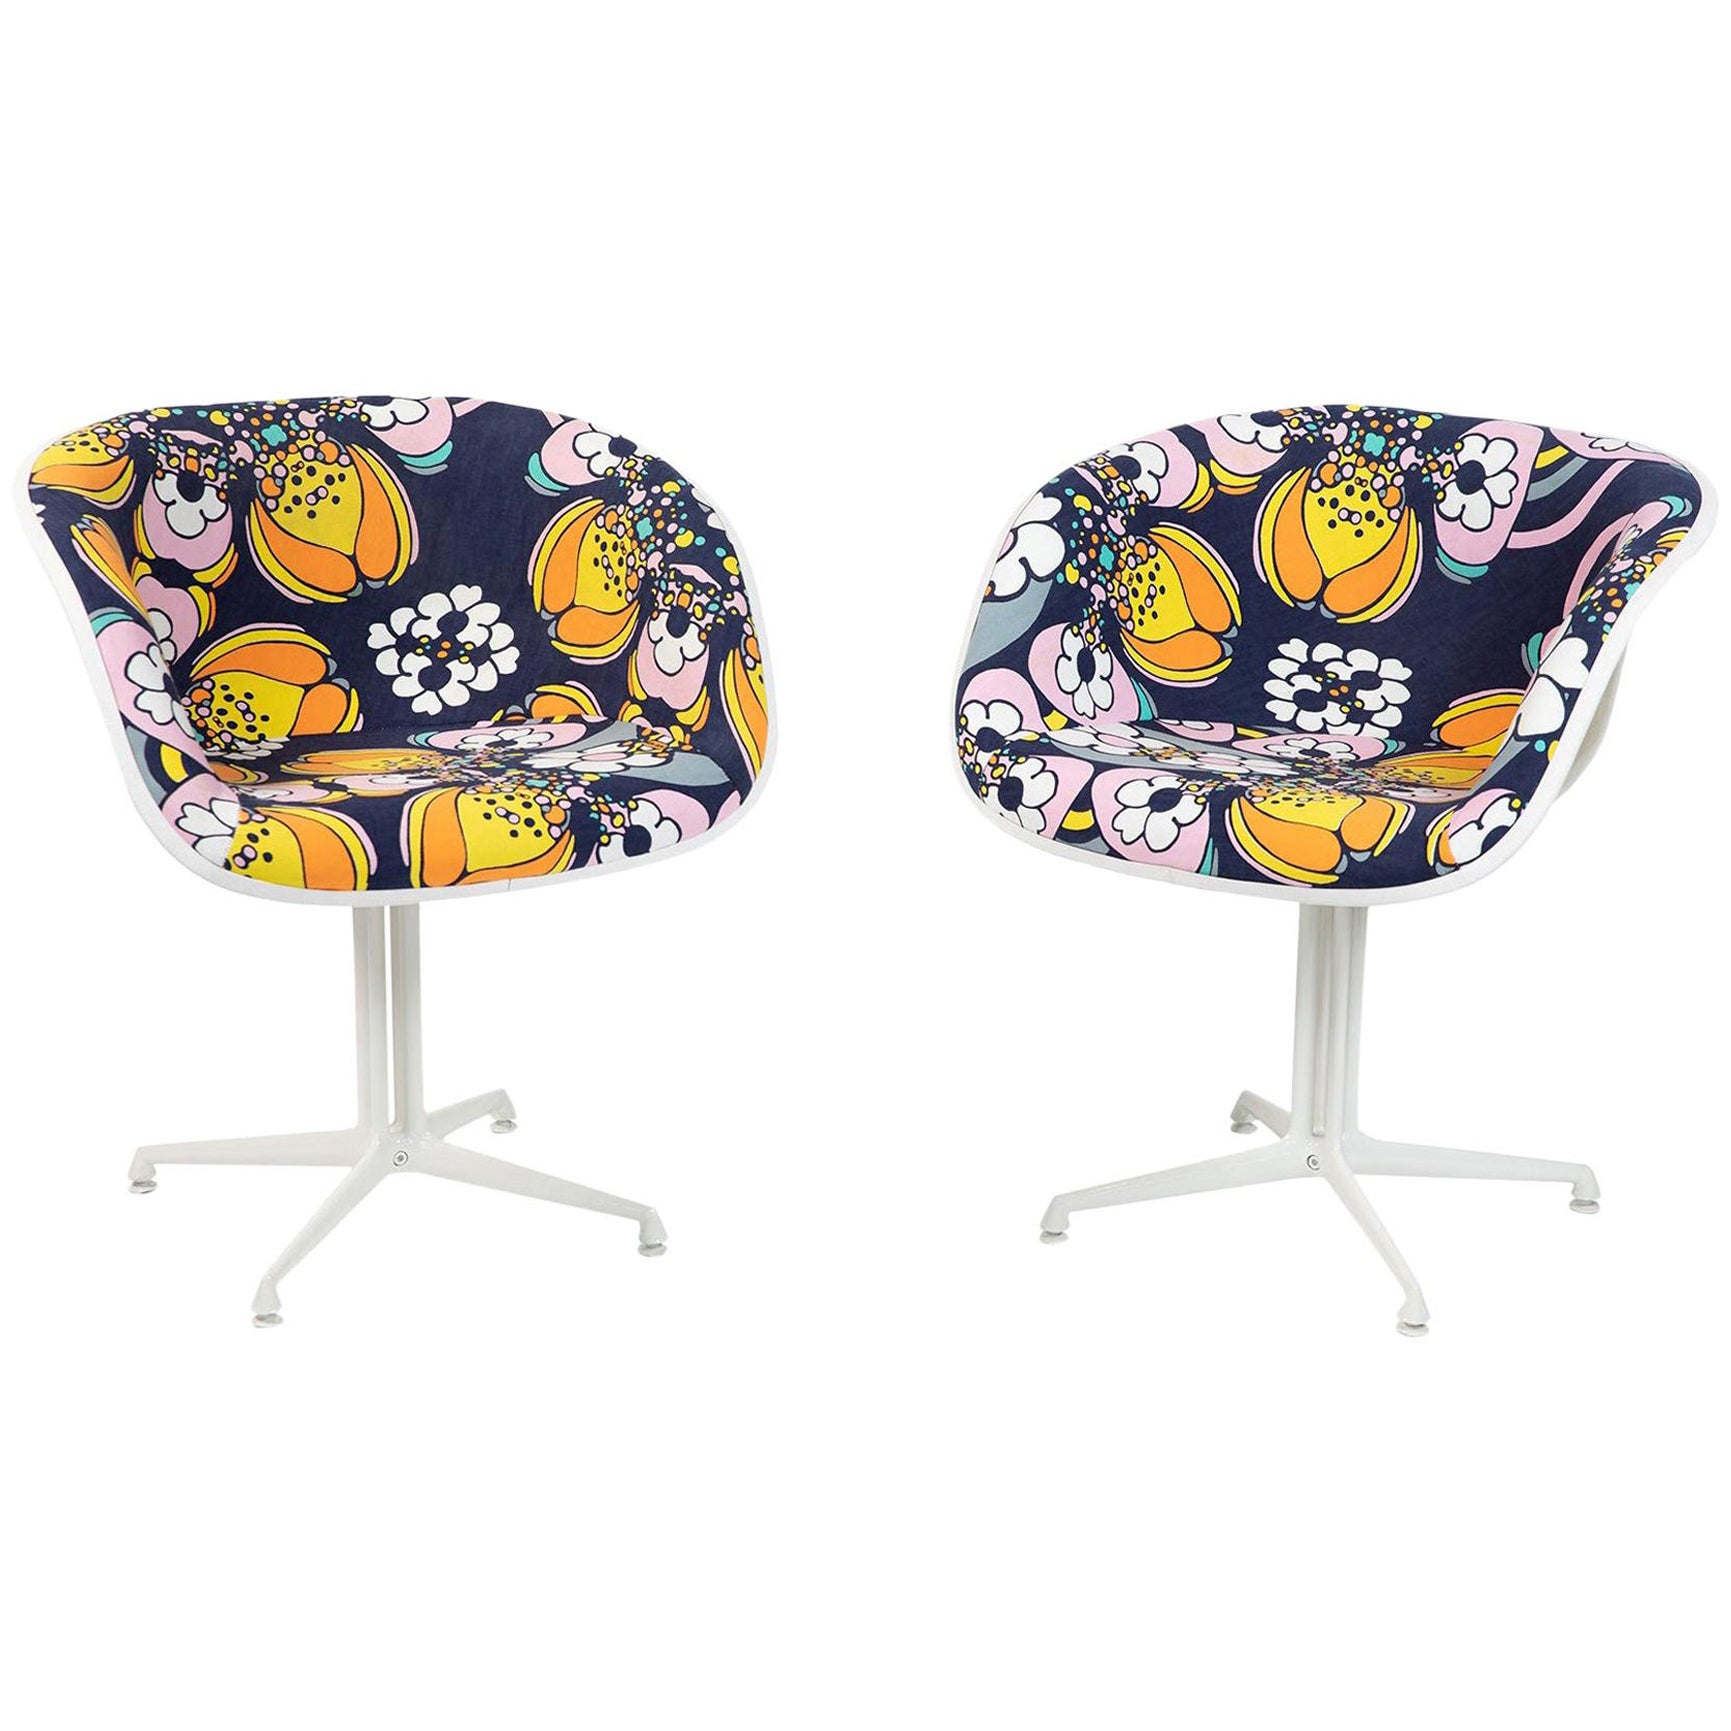 La Fonda Chairs by Eames for Herman Miller with Peter Max Fabric